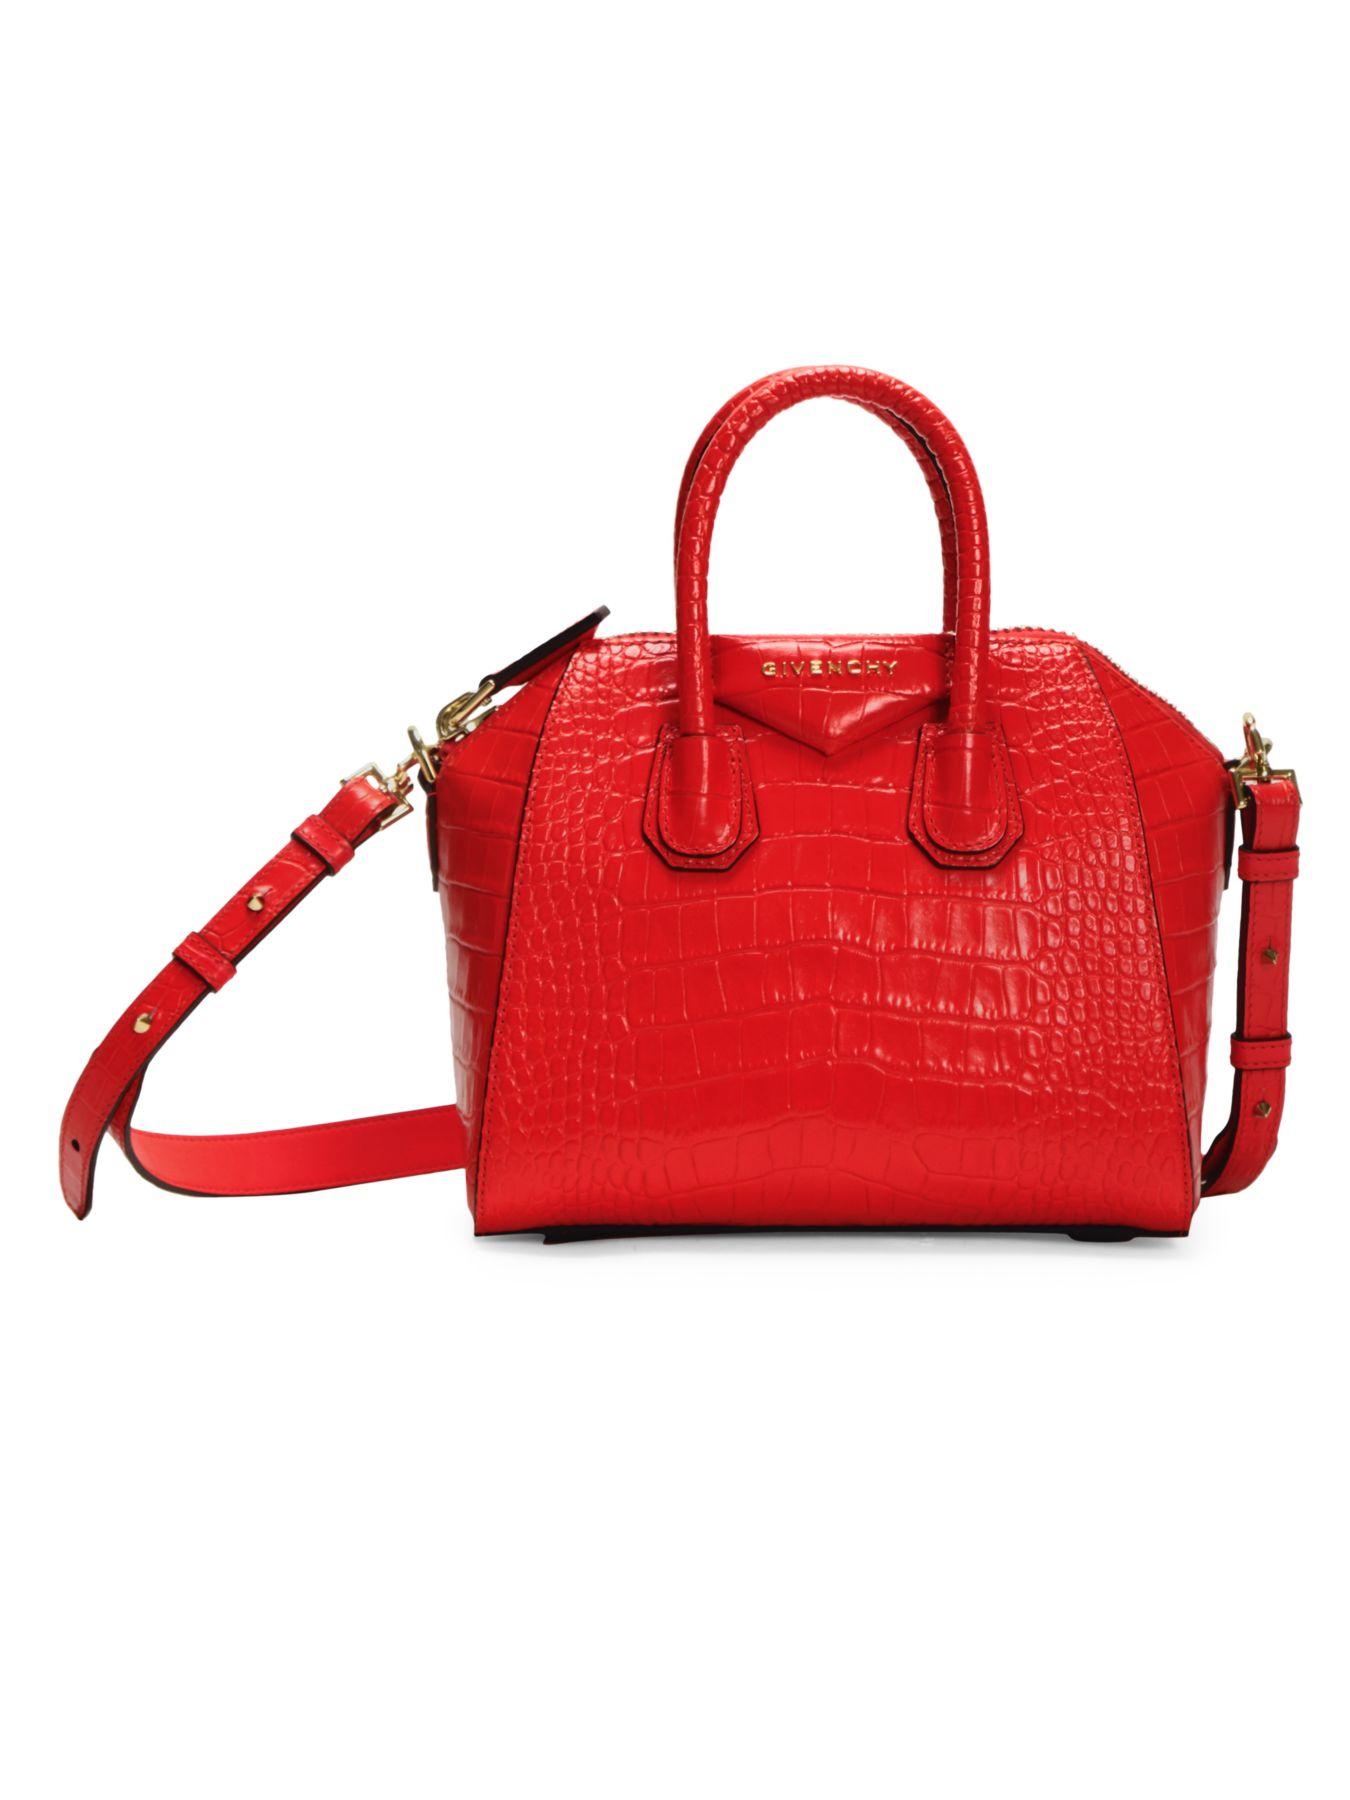 Givenchy Mini Antigona Croc-embossed Leather Satchel in Red - Lyst